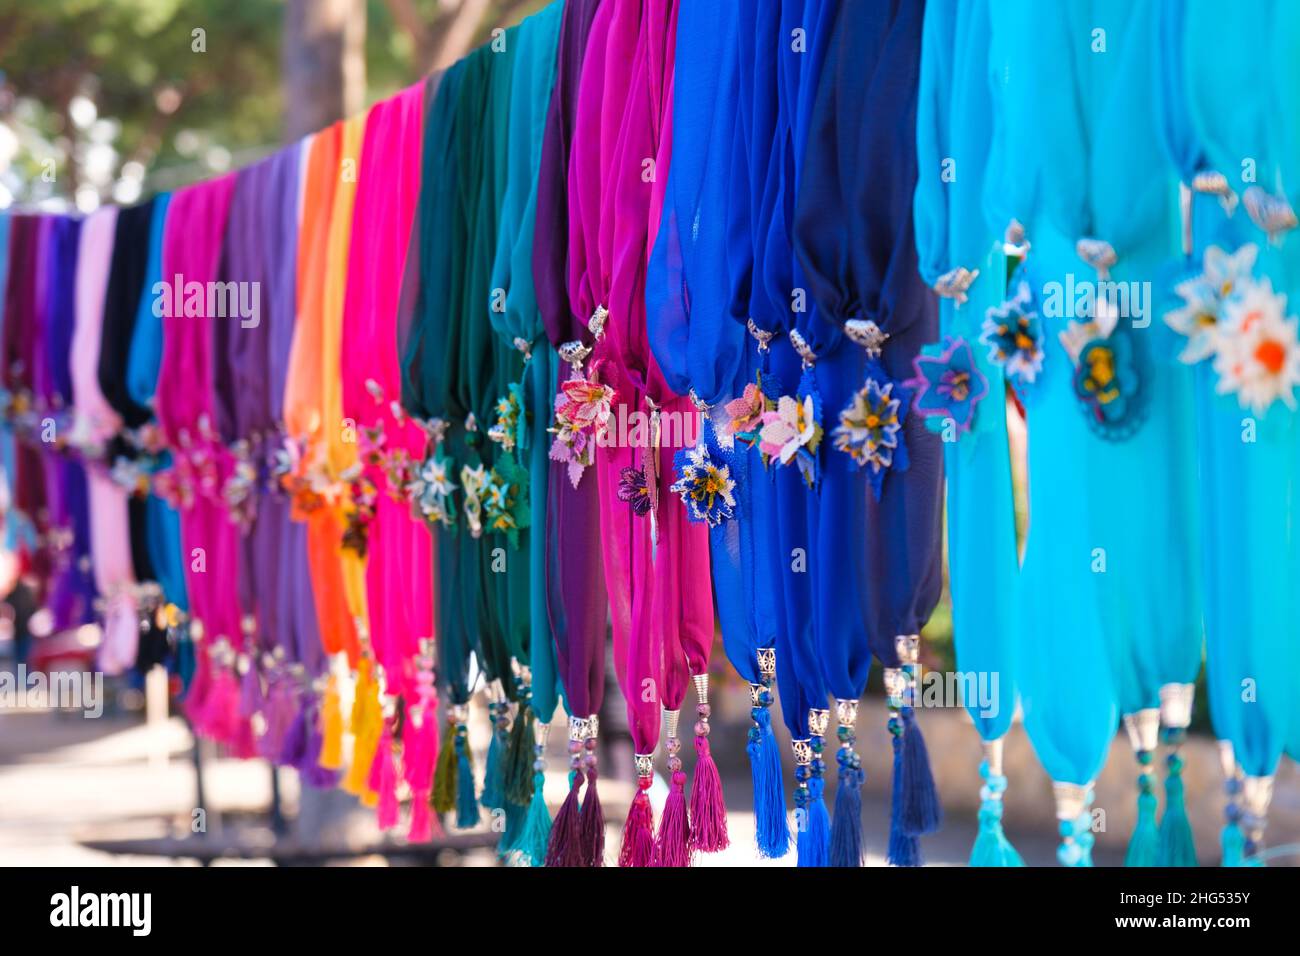 Colorful handmade or needle lace silk scarves lined up on a rope hanger in woman producer bazaar in Odemis, Izmir. Beautiful modern style chiffons. Stock Photo